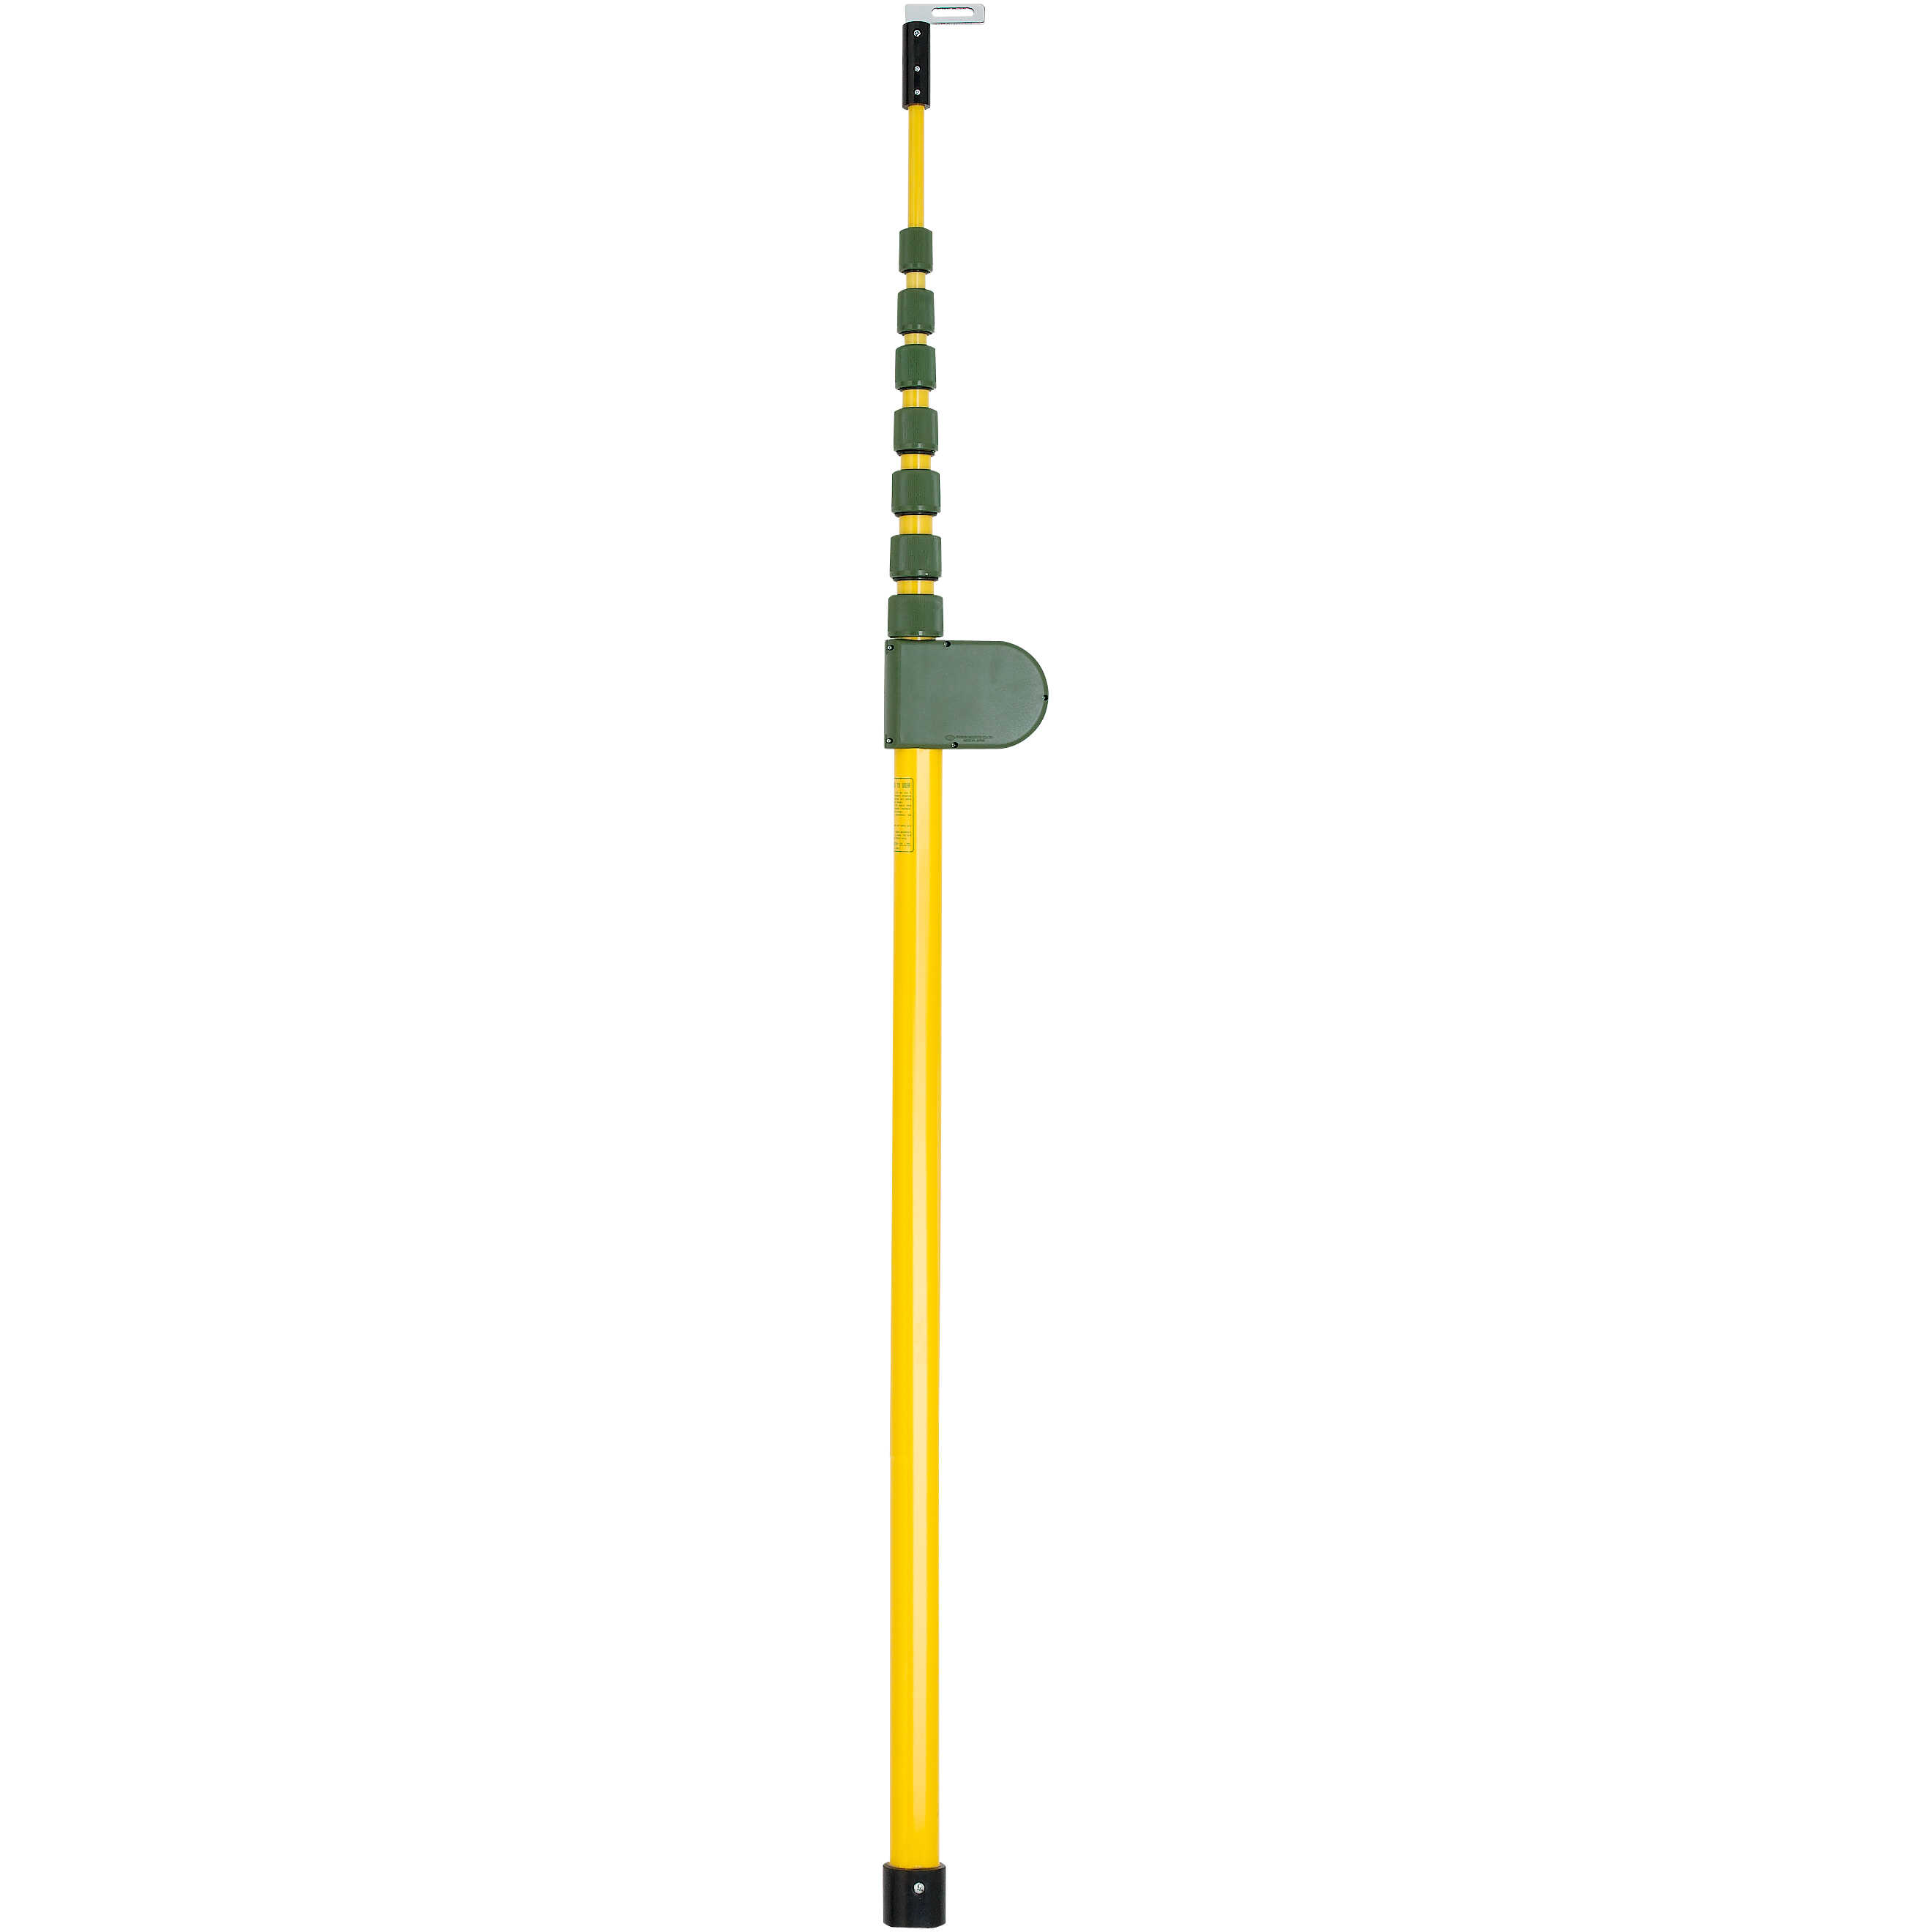 Details about   New Sokkia 7.62 Meter Fiberglass Telescopic Rod in Metric Increments with Case 